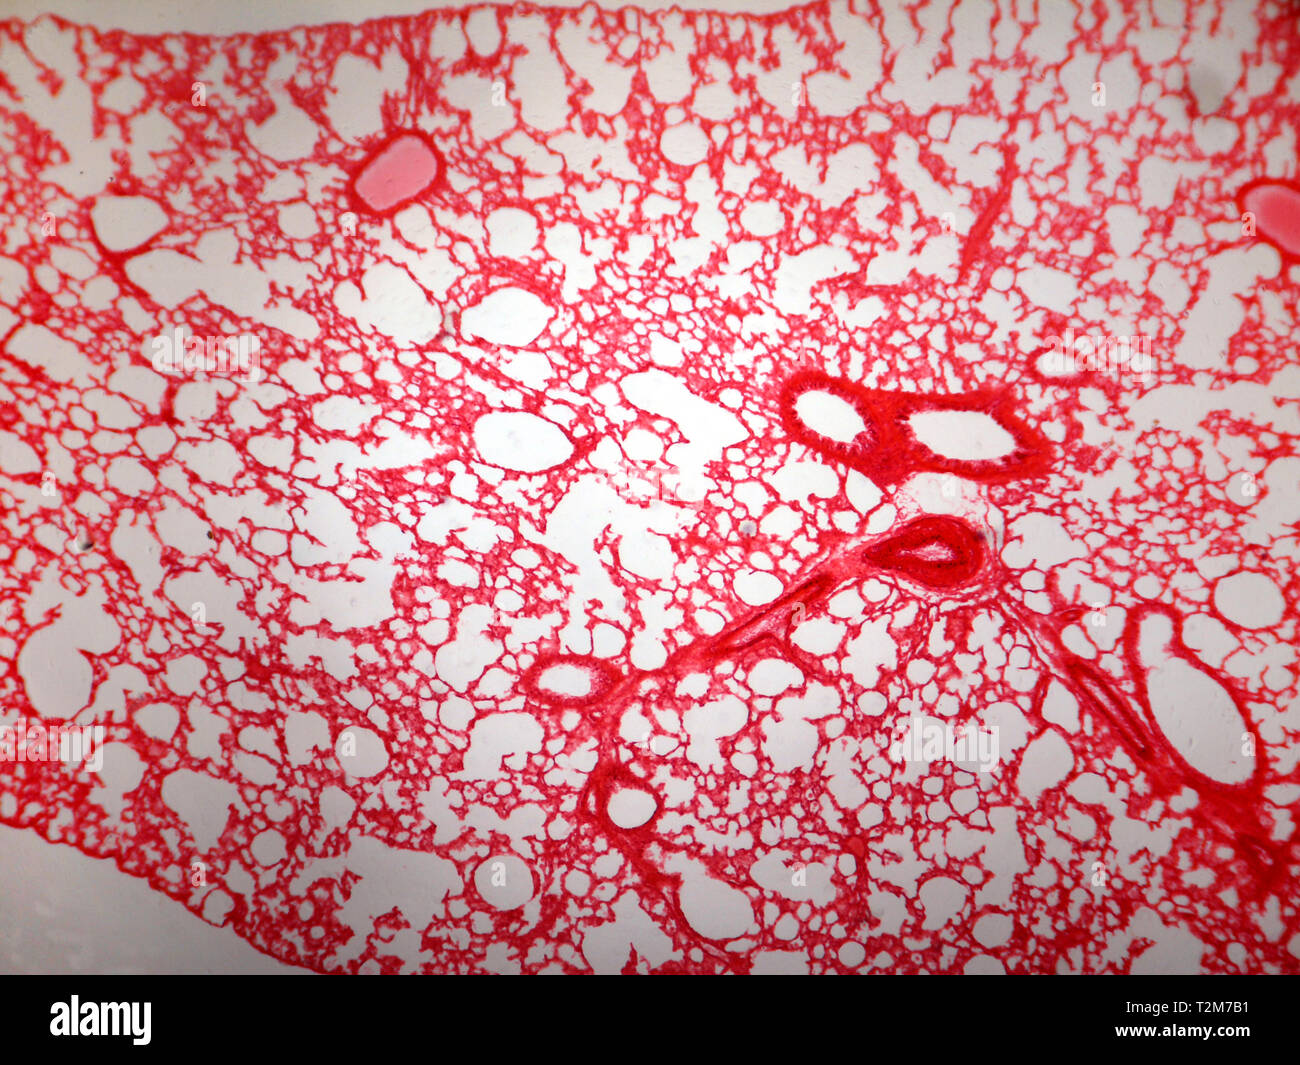 Lung tissue. Stock Photo